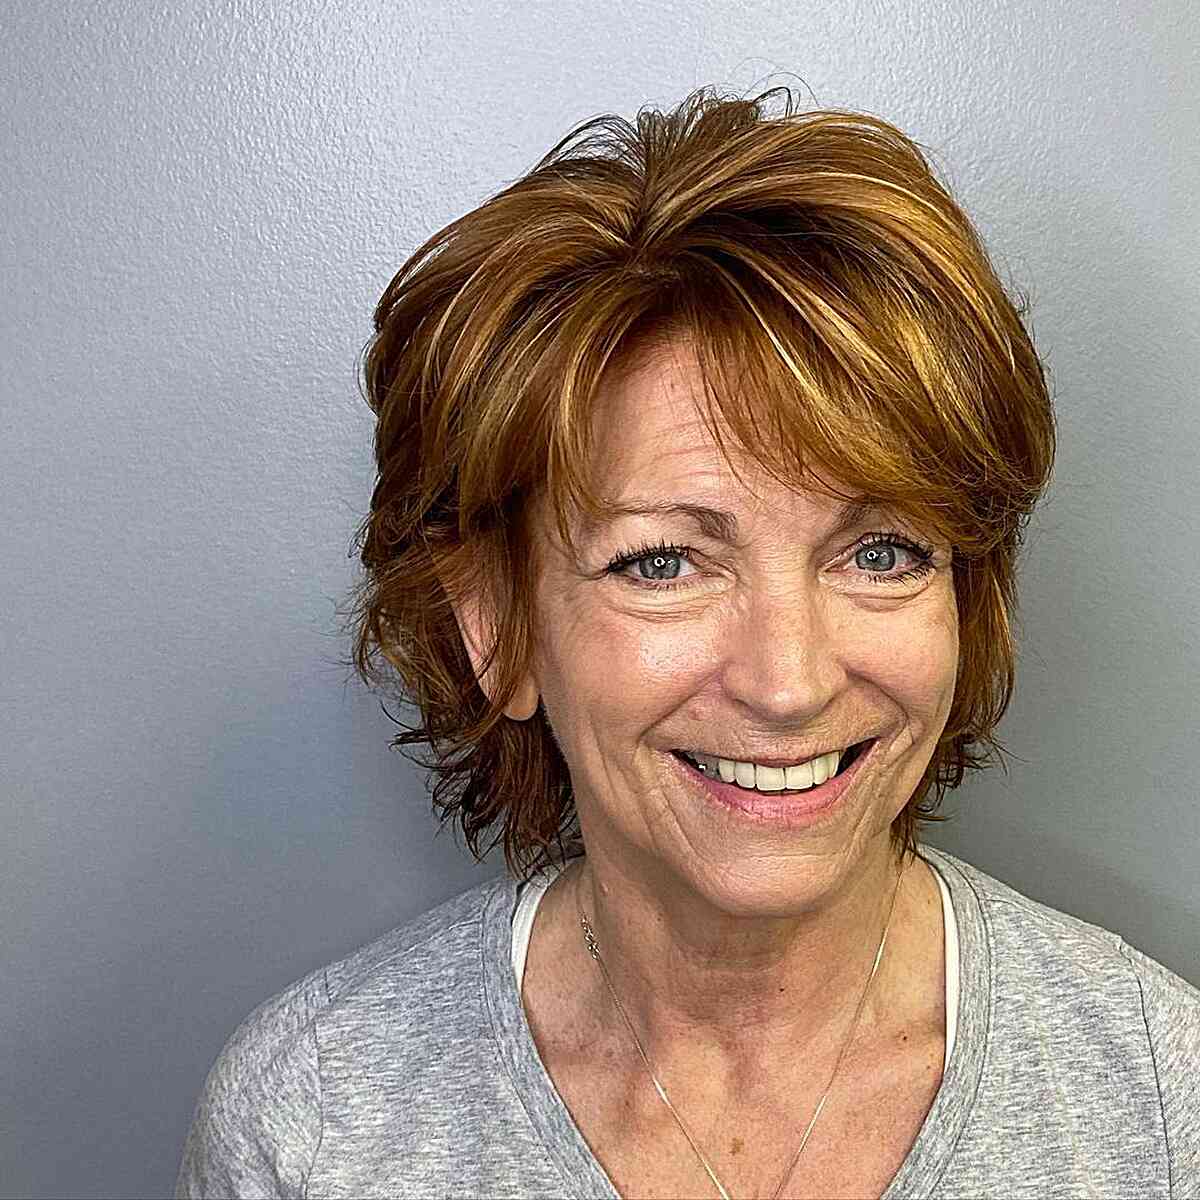 Dimensional Short Shag with Swoopy Bangs for Women Over 60 and Up